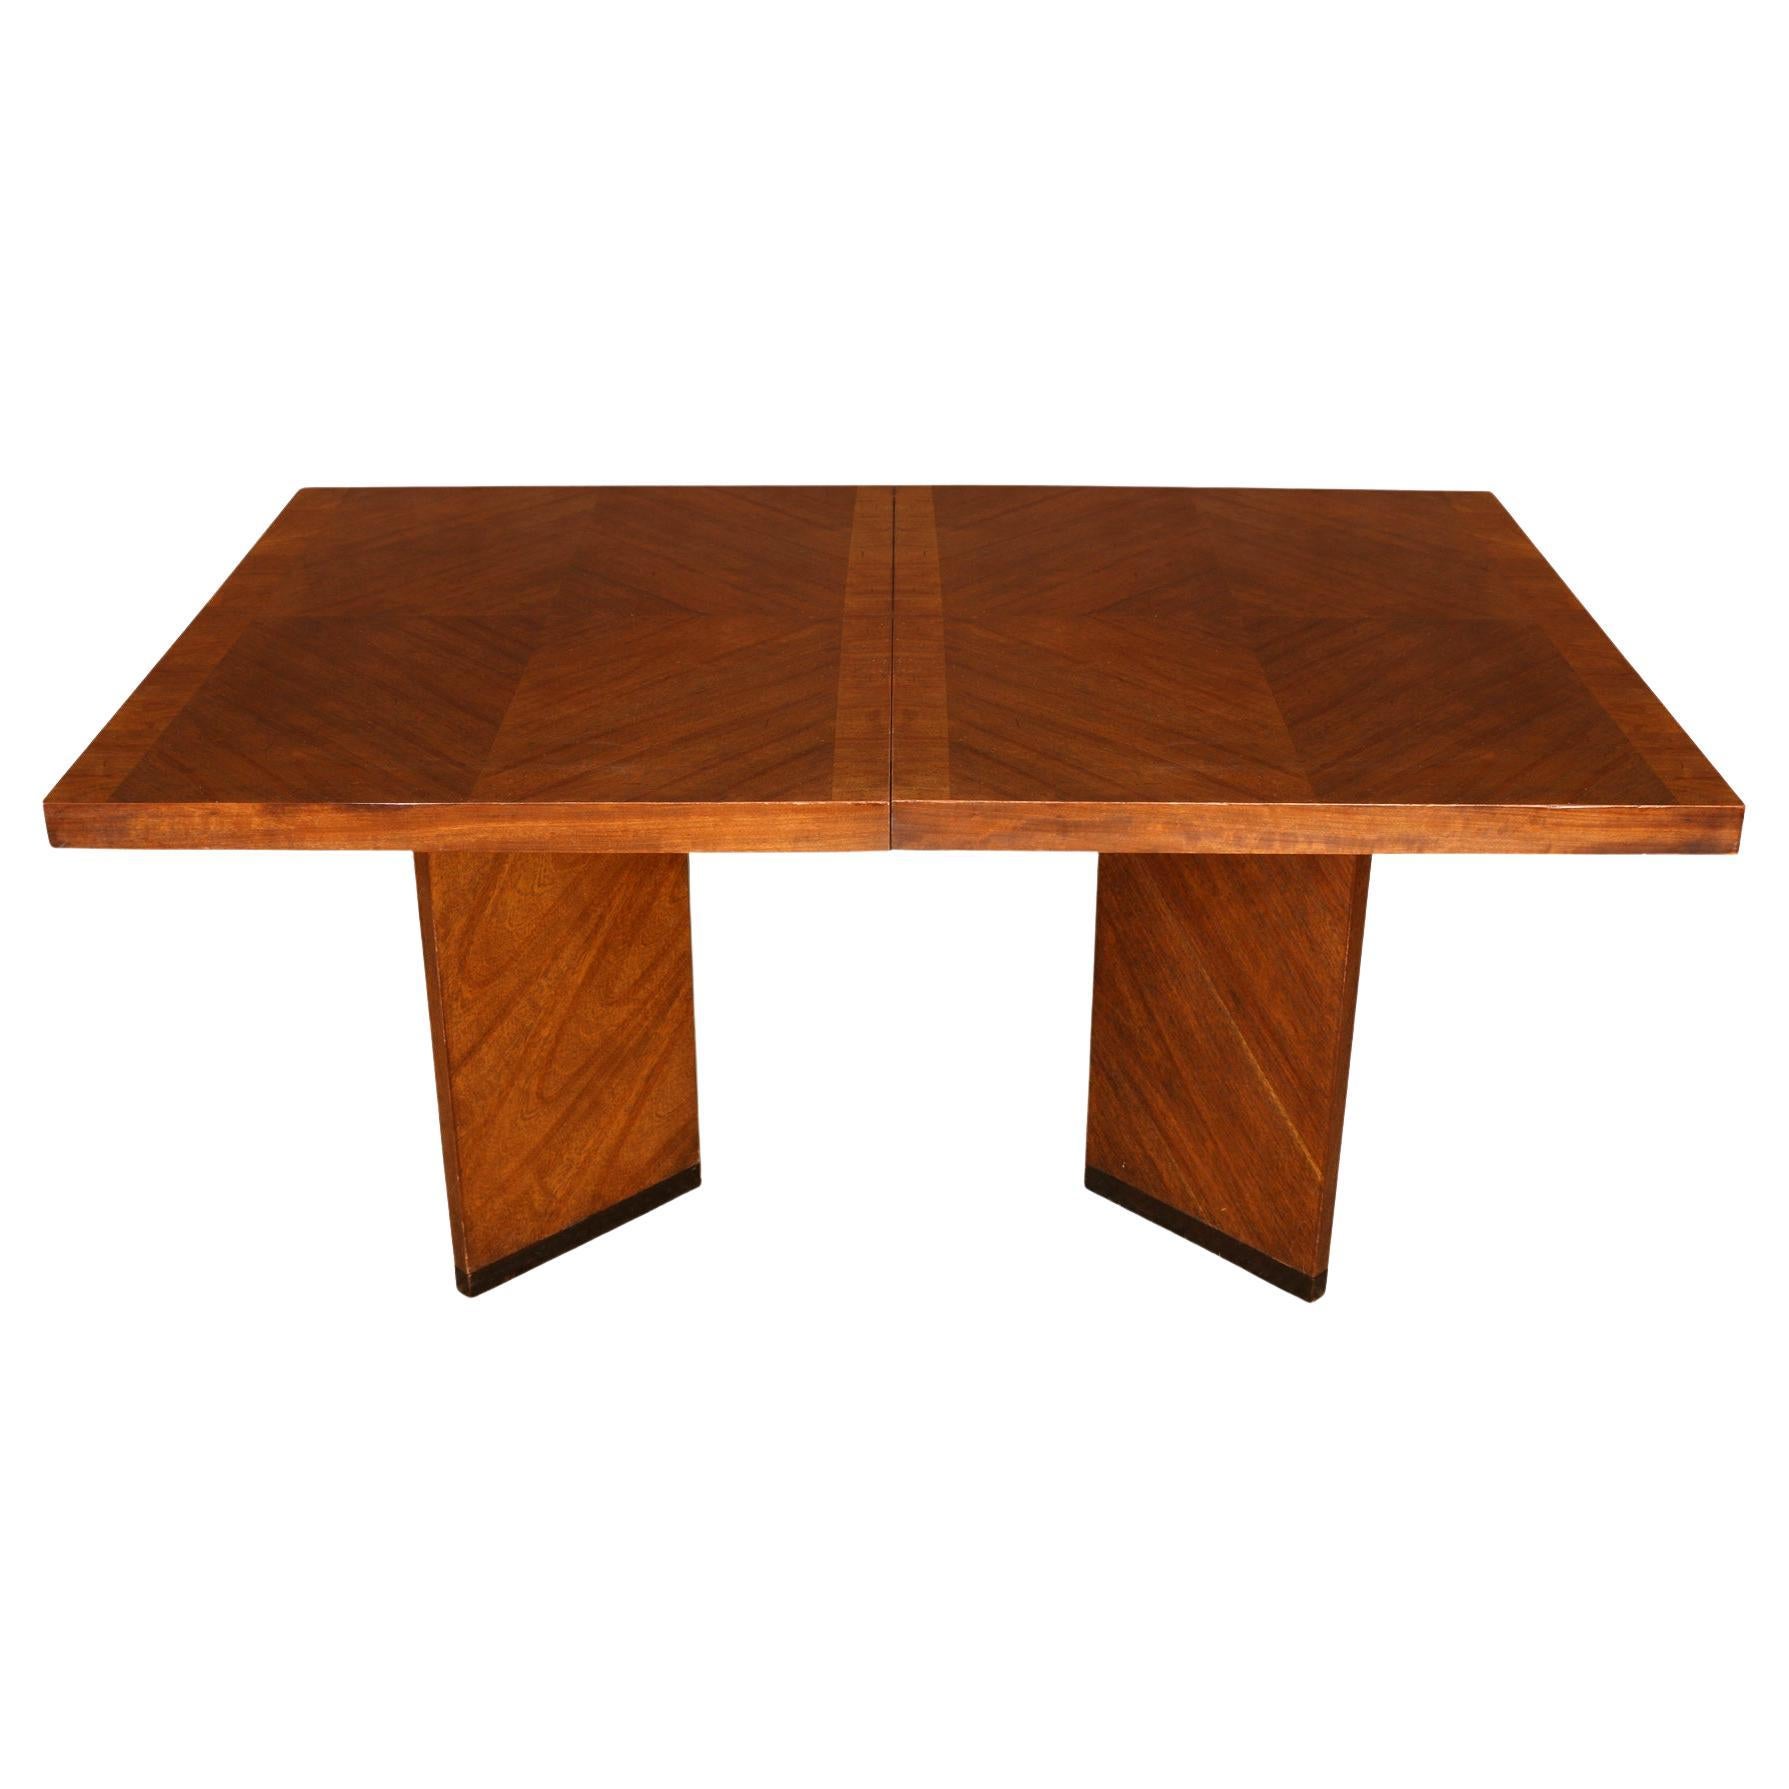 Modern Dining Table With Chevron Design and Angular Legs For Sale